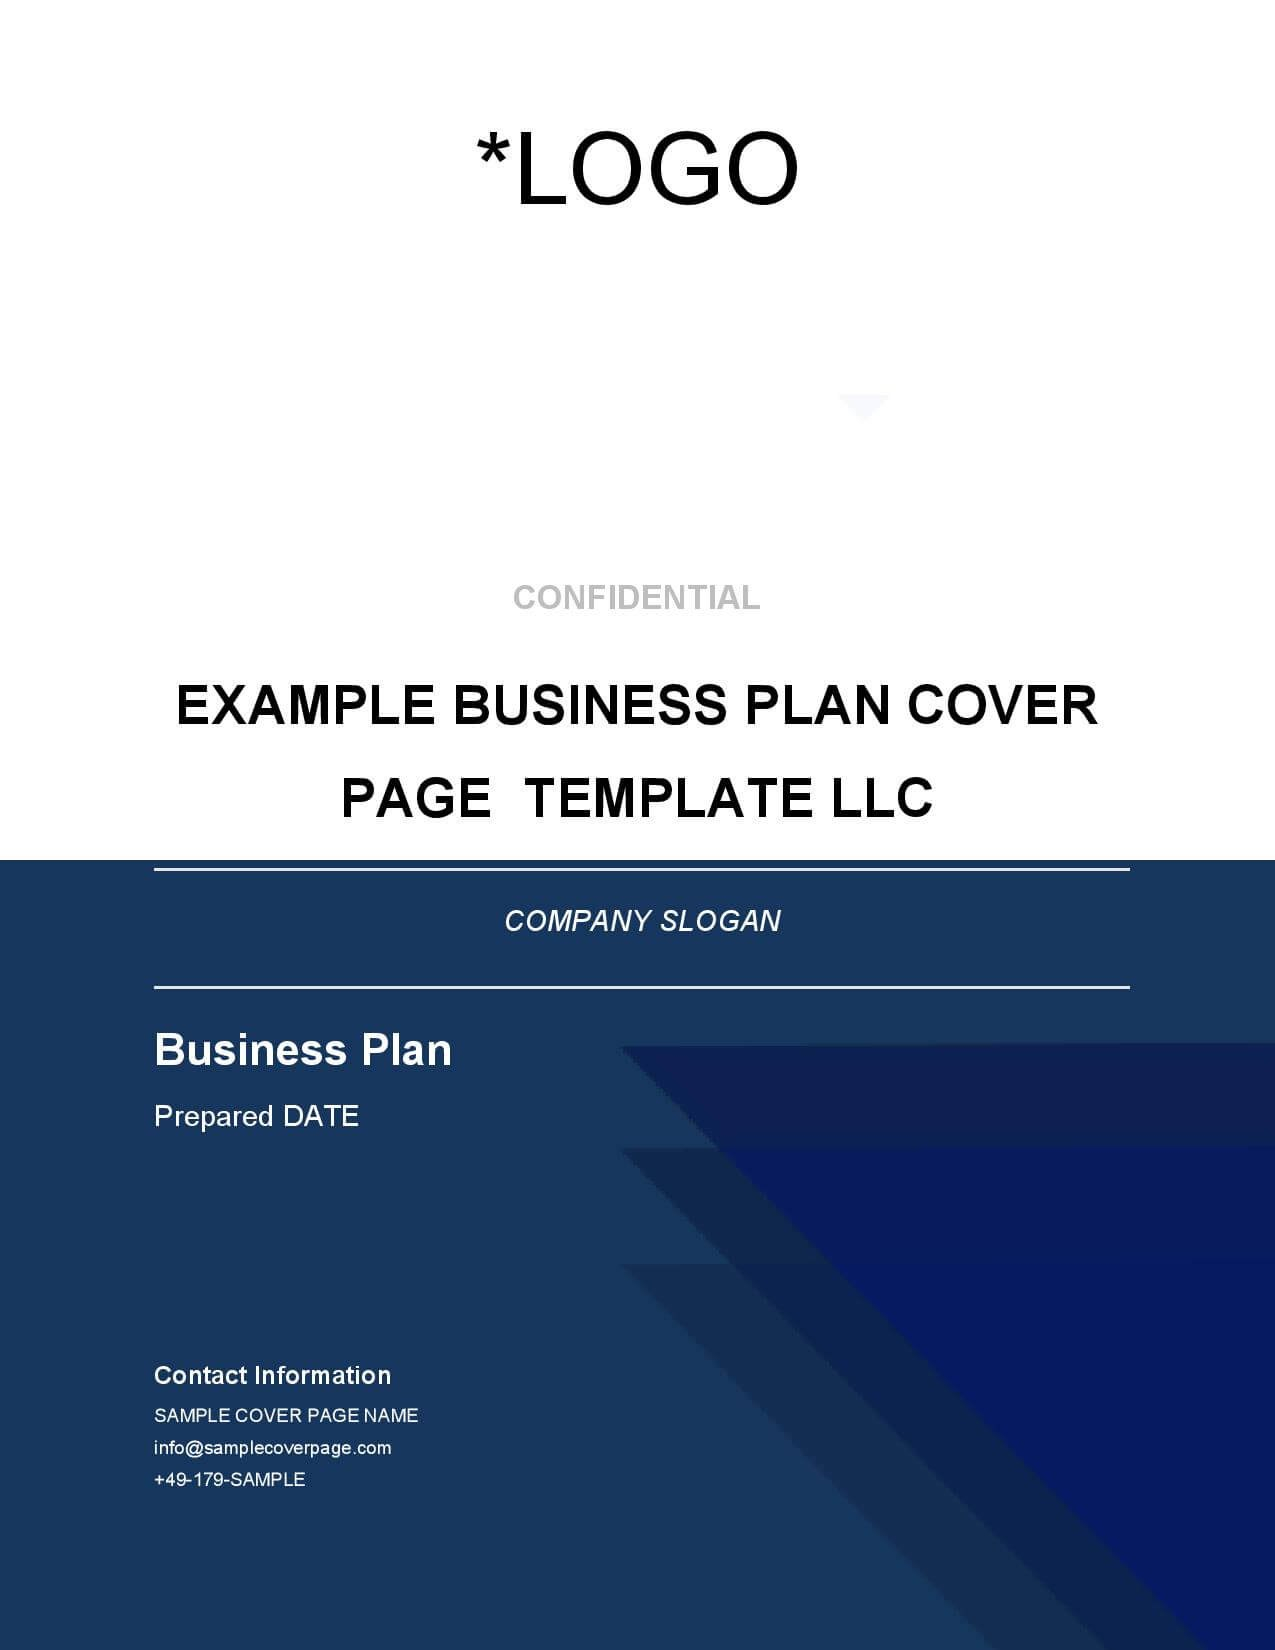 Business Plan Cover Page Template  Brainhive Business Planning with regard to Business Plan Cover Page Template